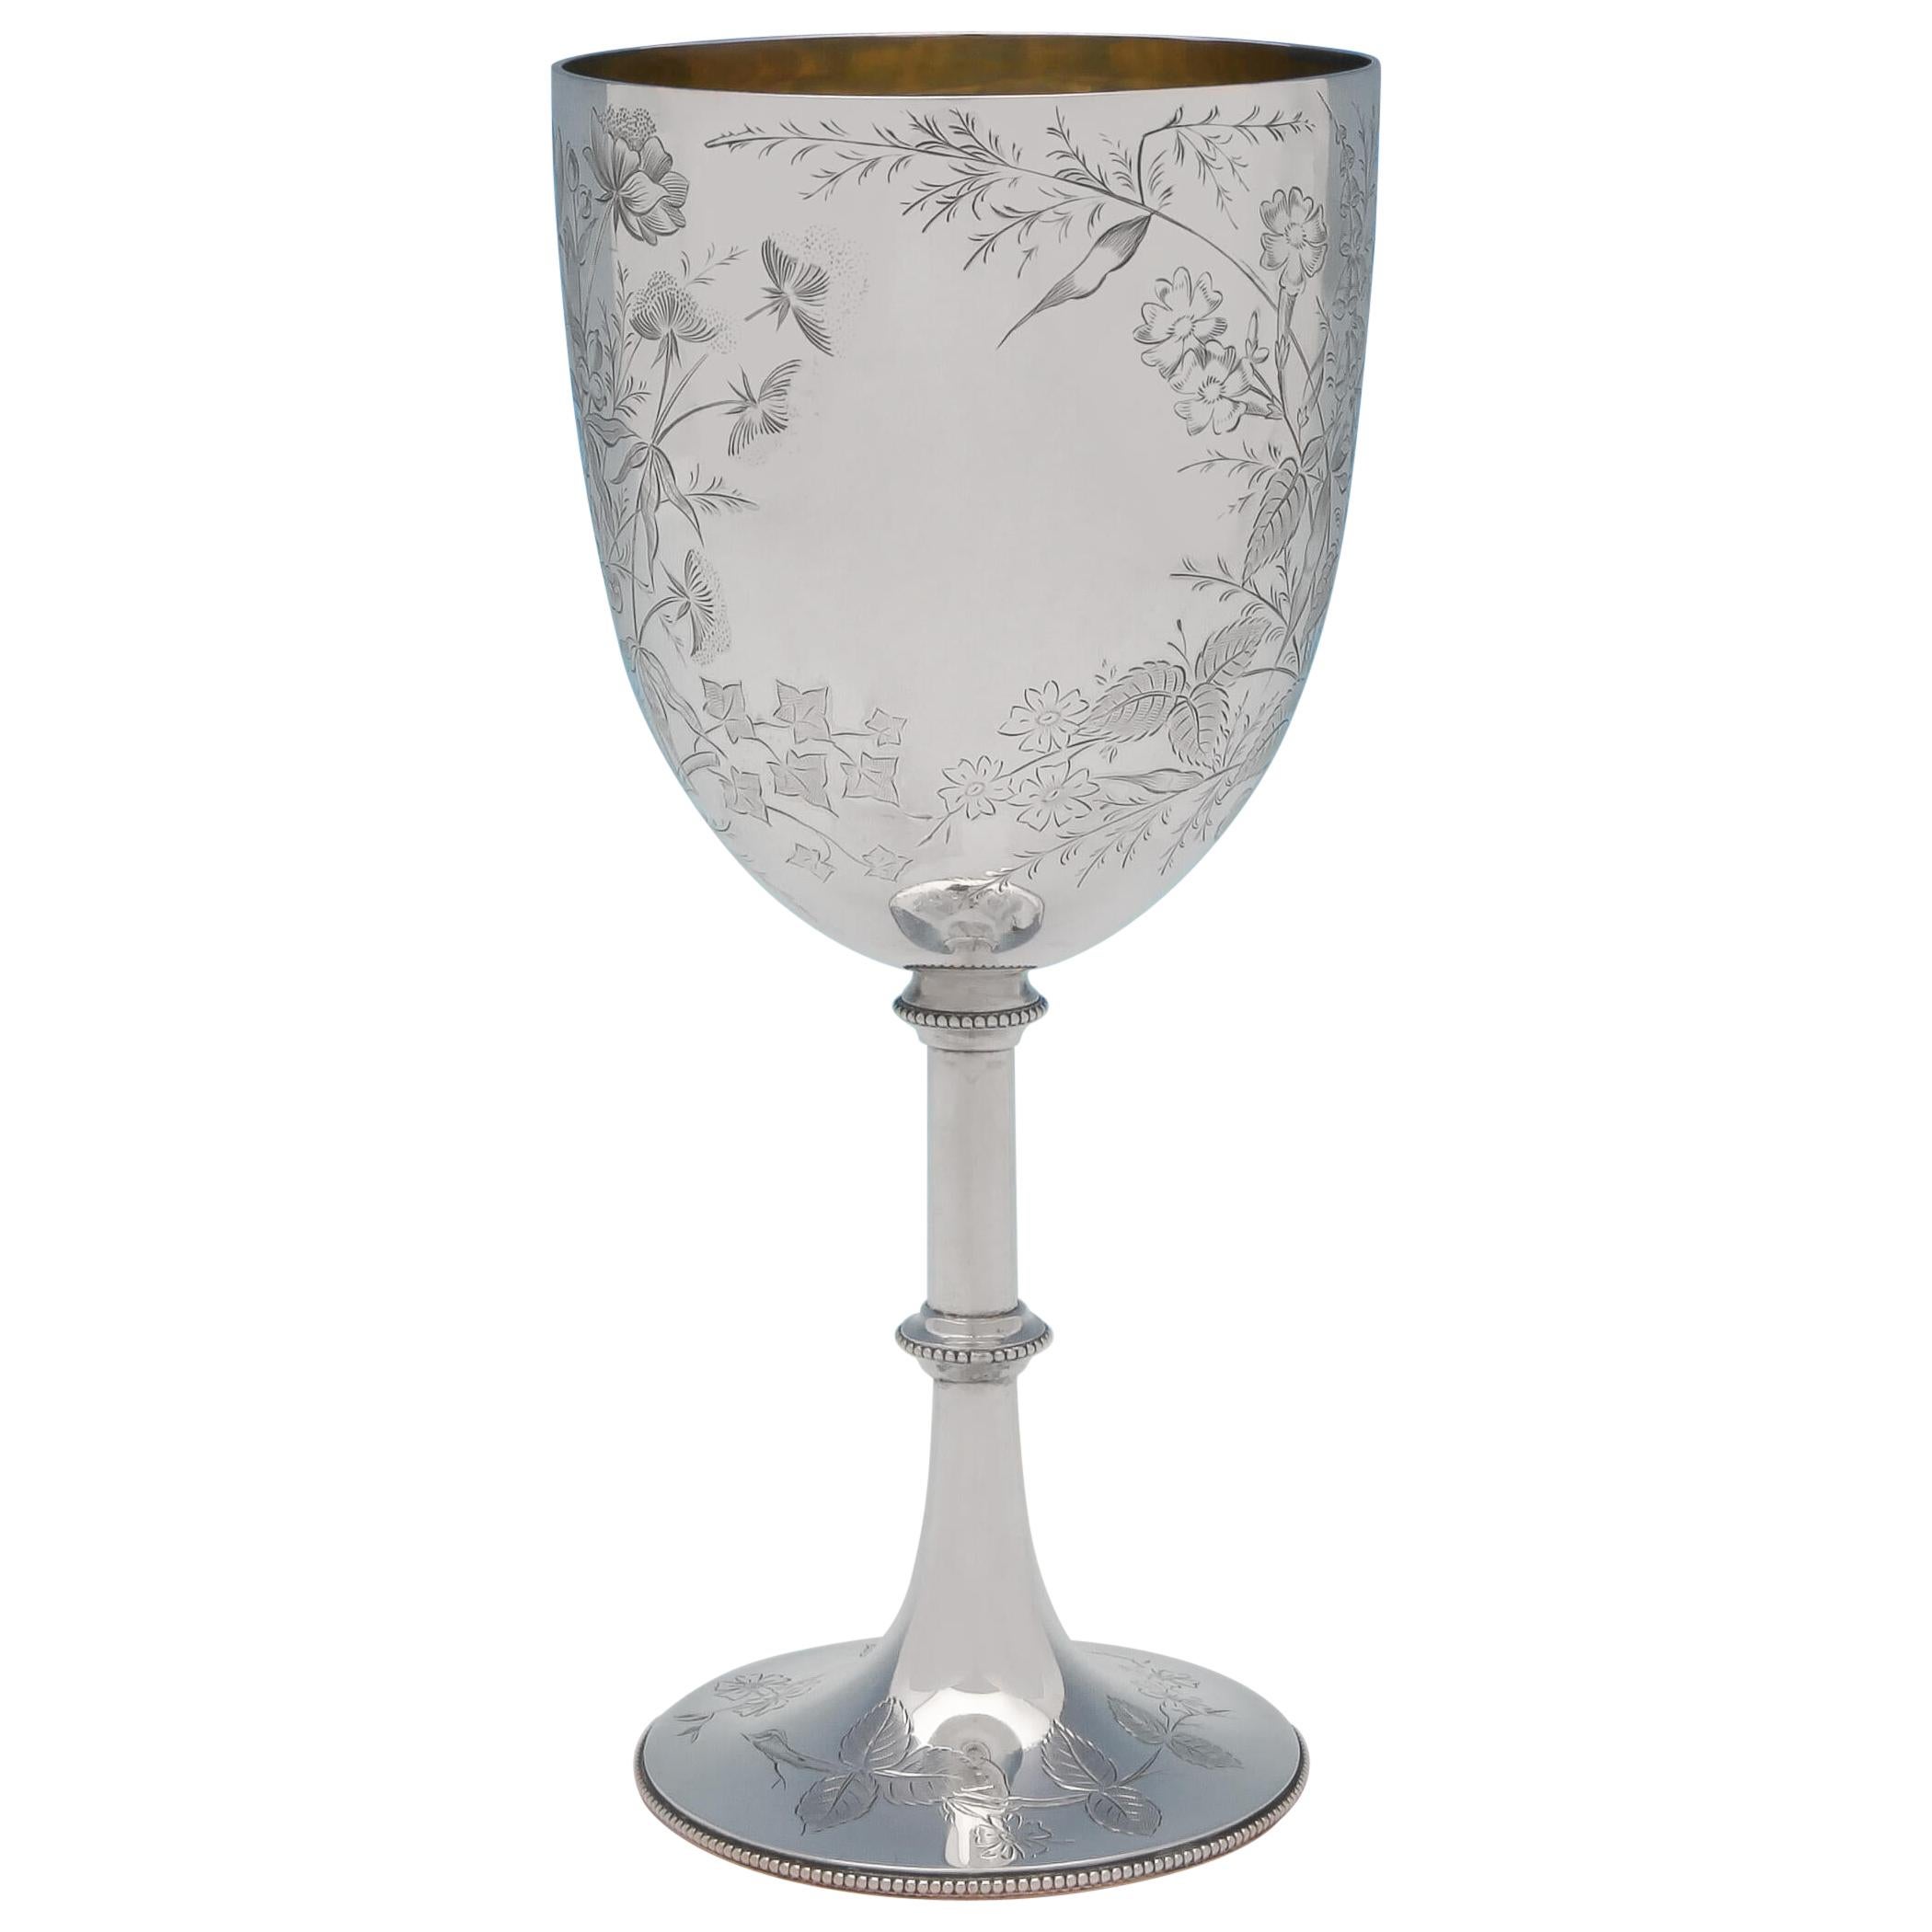 Victorian Aesthetic Period Engraved Sterling Silver Goblet by W. W. Harrison